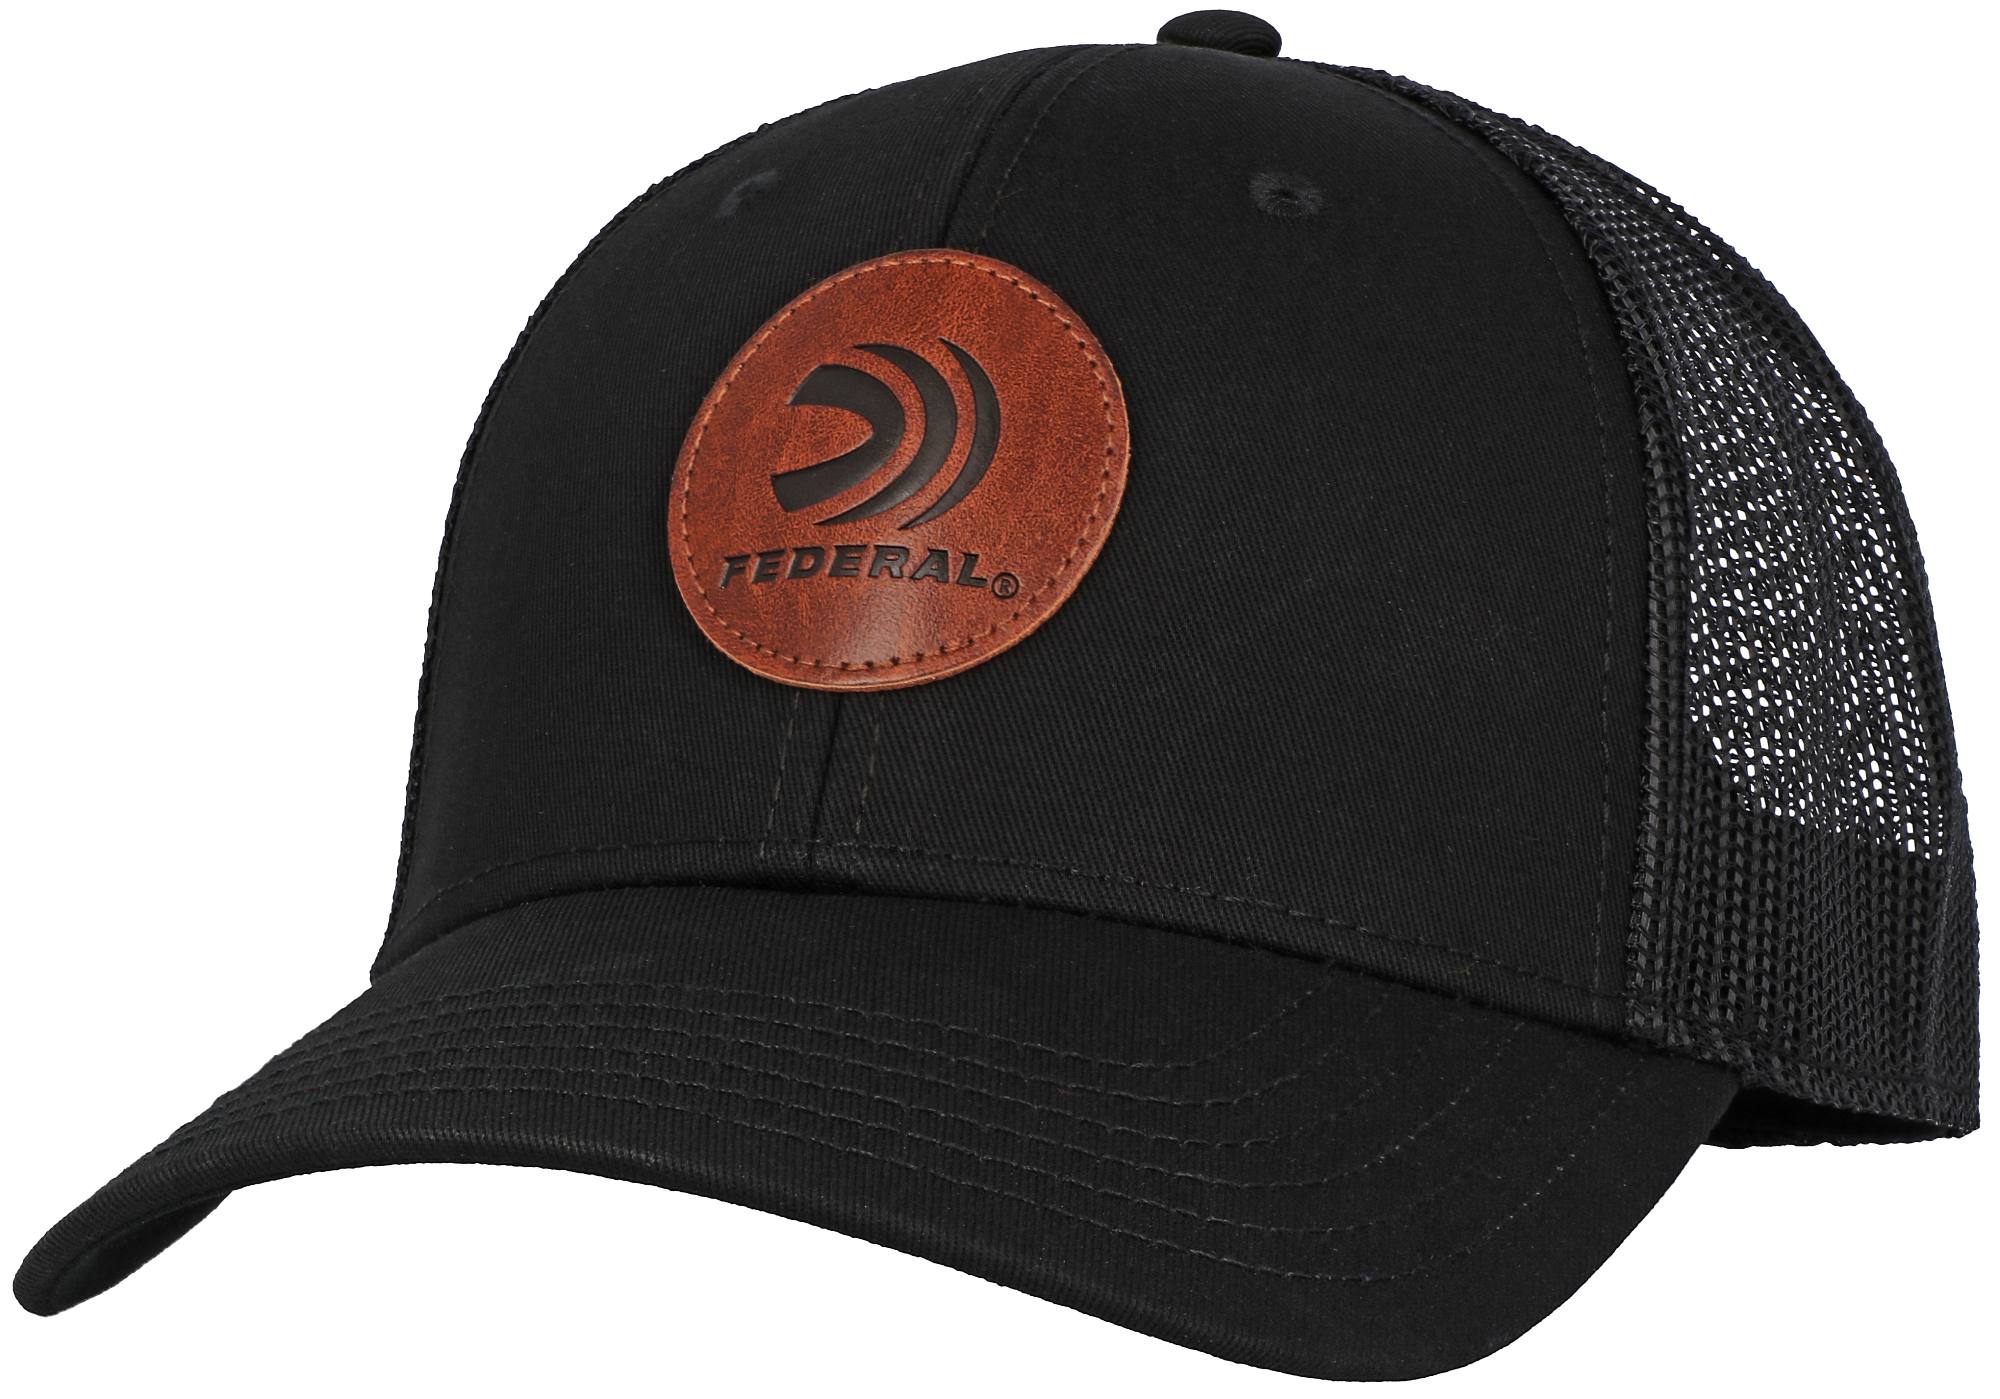 Federal L-Patch Mesh Hat